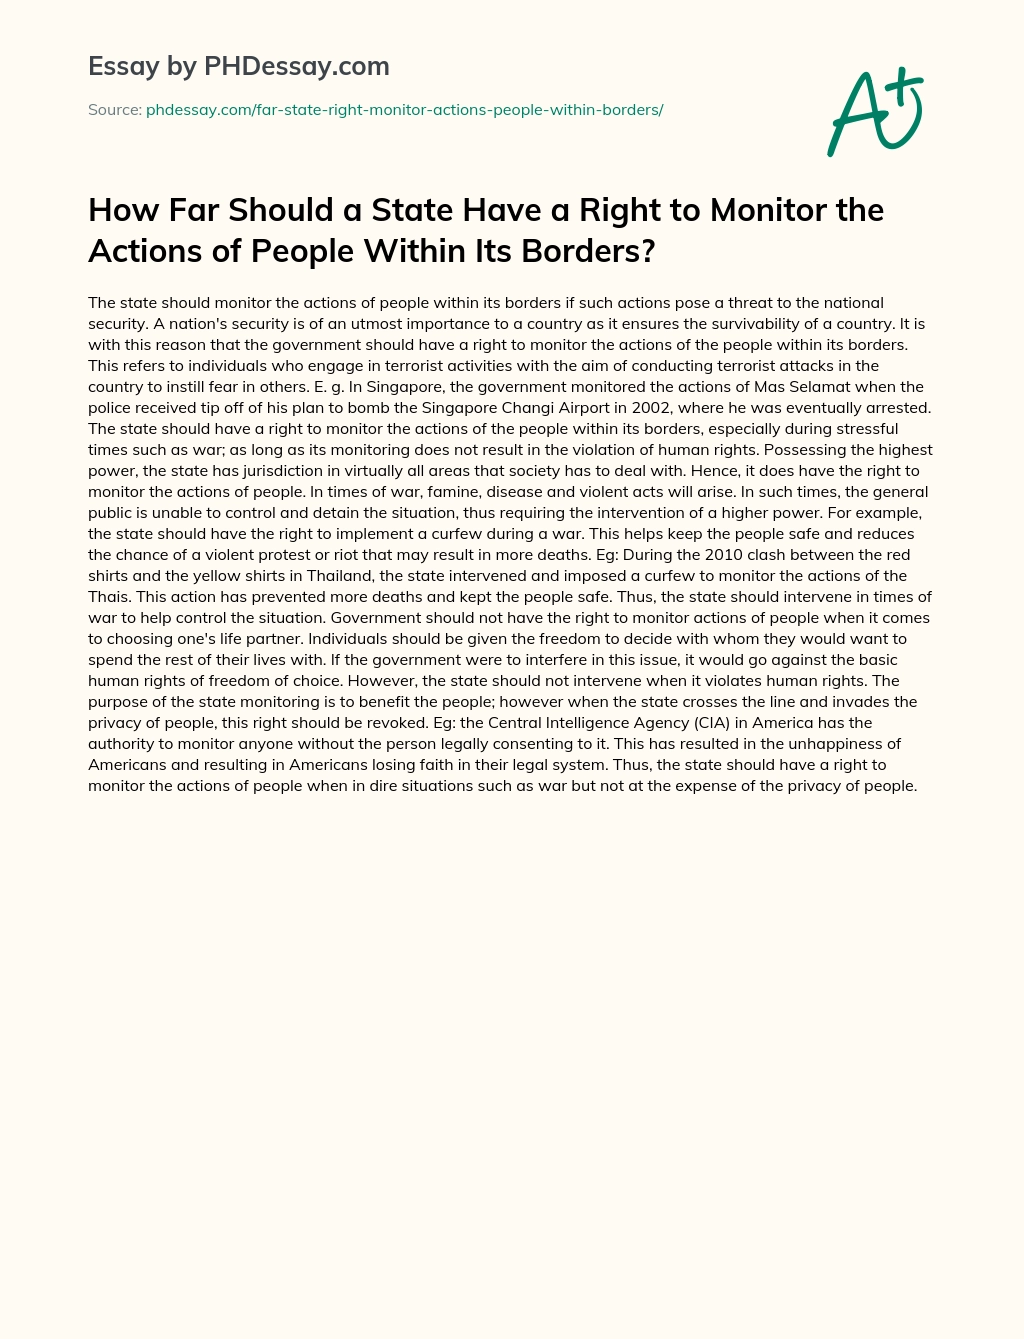 How Far Should a State Have a Right to Monitor the Actions of People Within Its Borders? essay